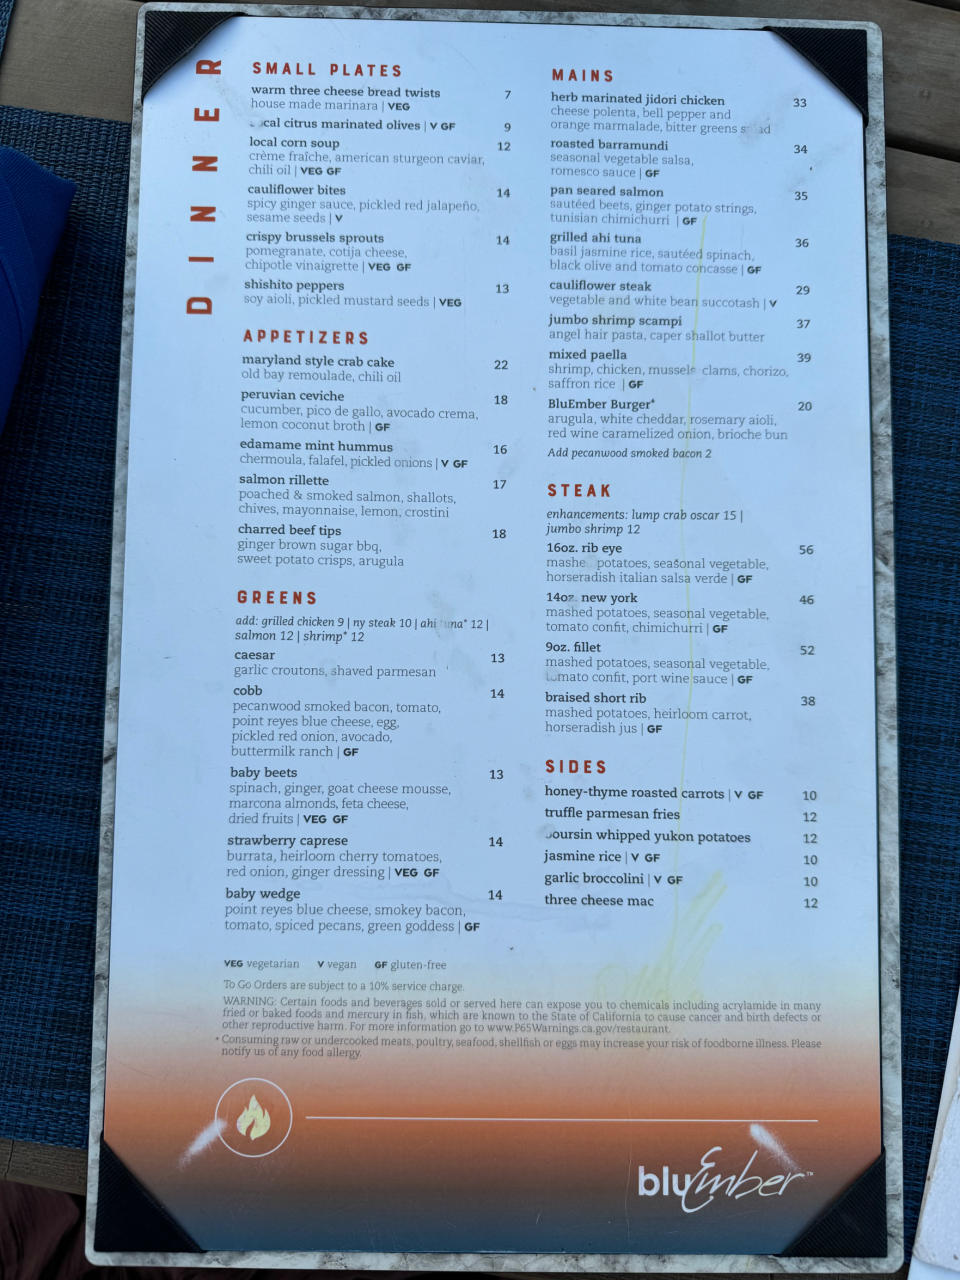 Menu of a restaurant with various dinner options, including appetizers, salads, steaks, and sides. Prices listed alongside each item